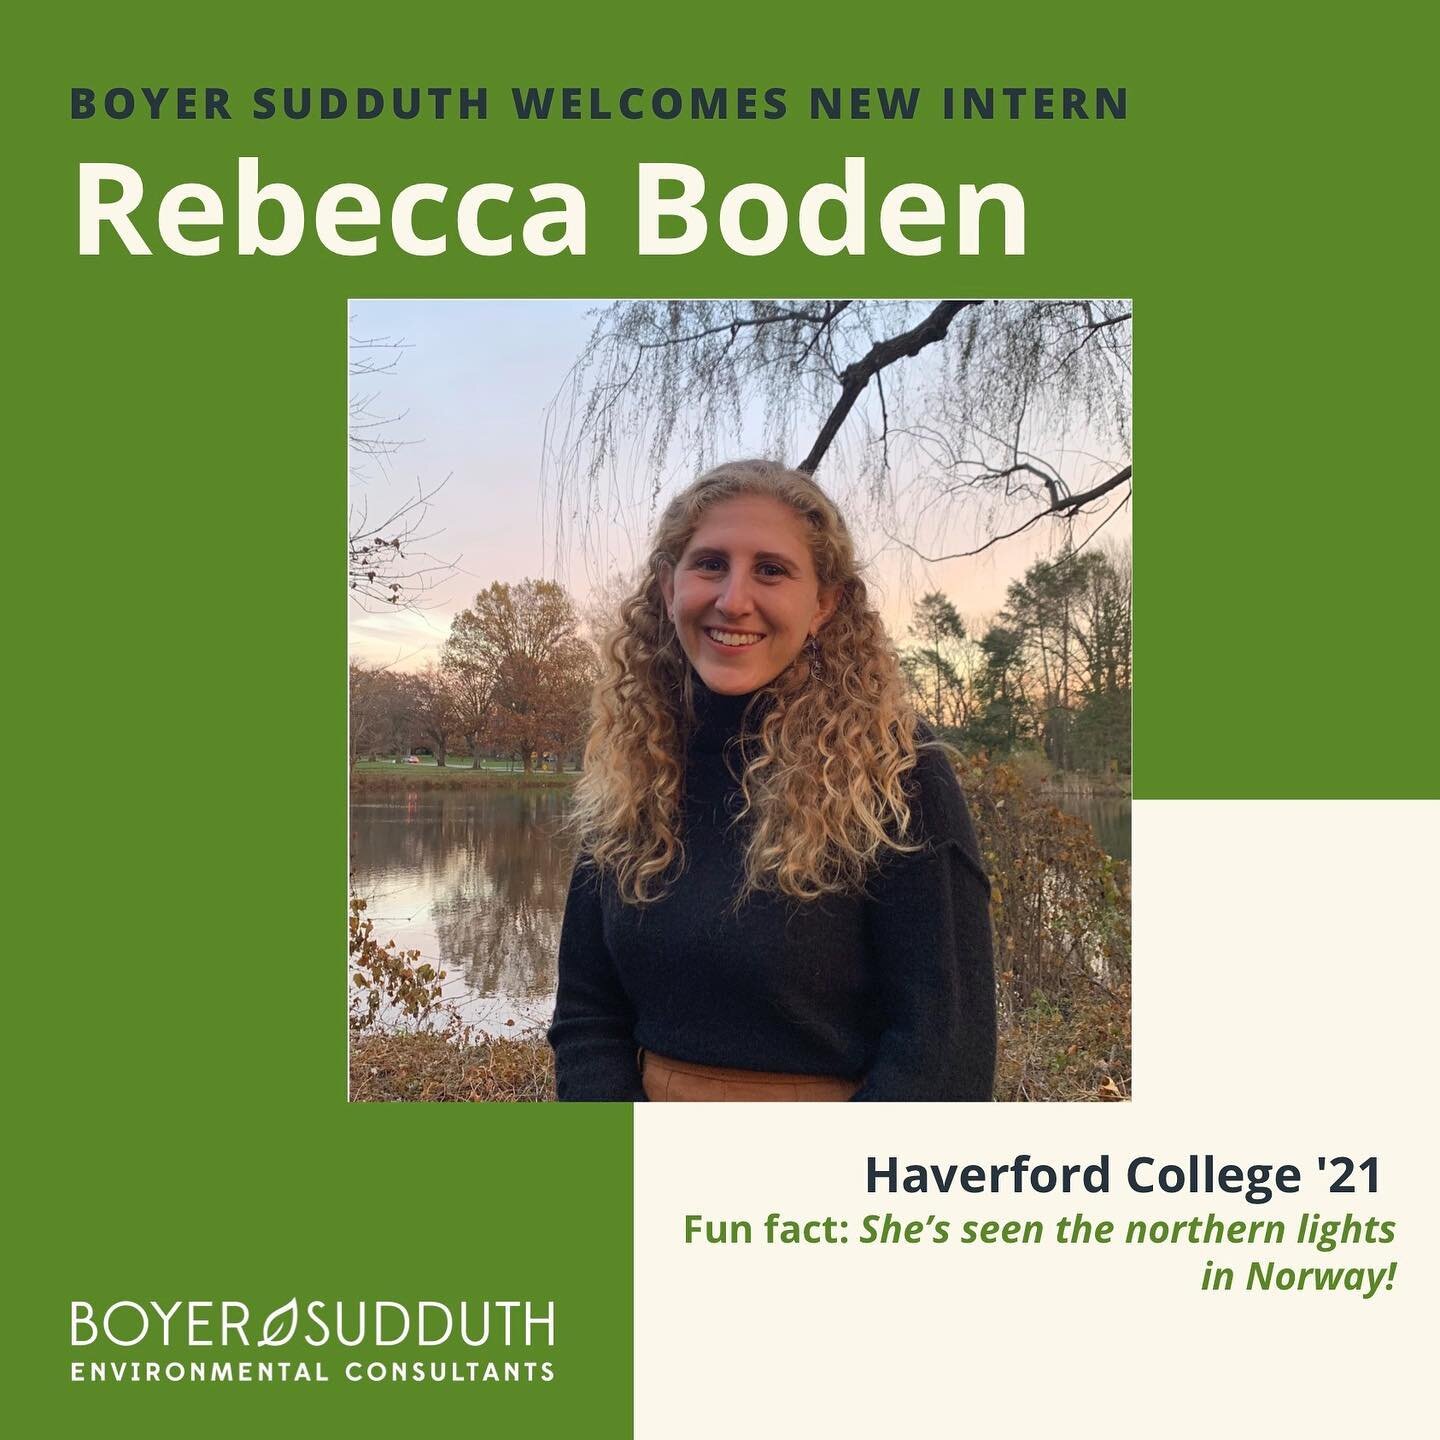 Today we welcome another new spring 2021 intern. Welcome Becca! 

Becca is a senior at Haverford College majoring in environmental studies and biology. Her passion lies in exploring the role of biodiversity within the context of conservation and envi